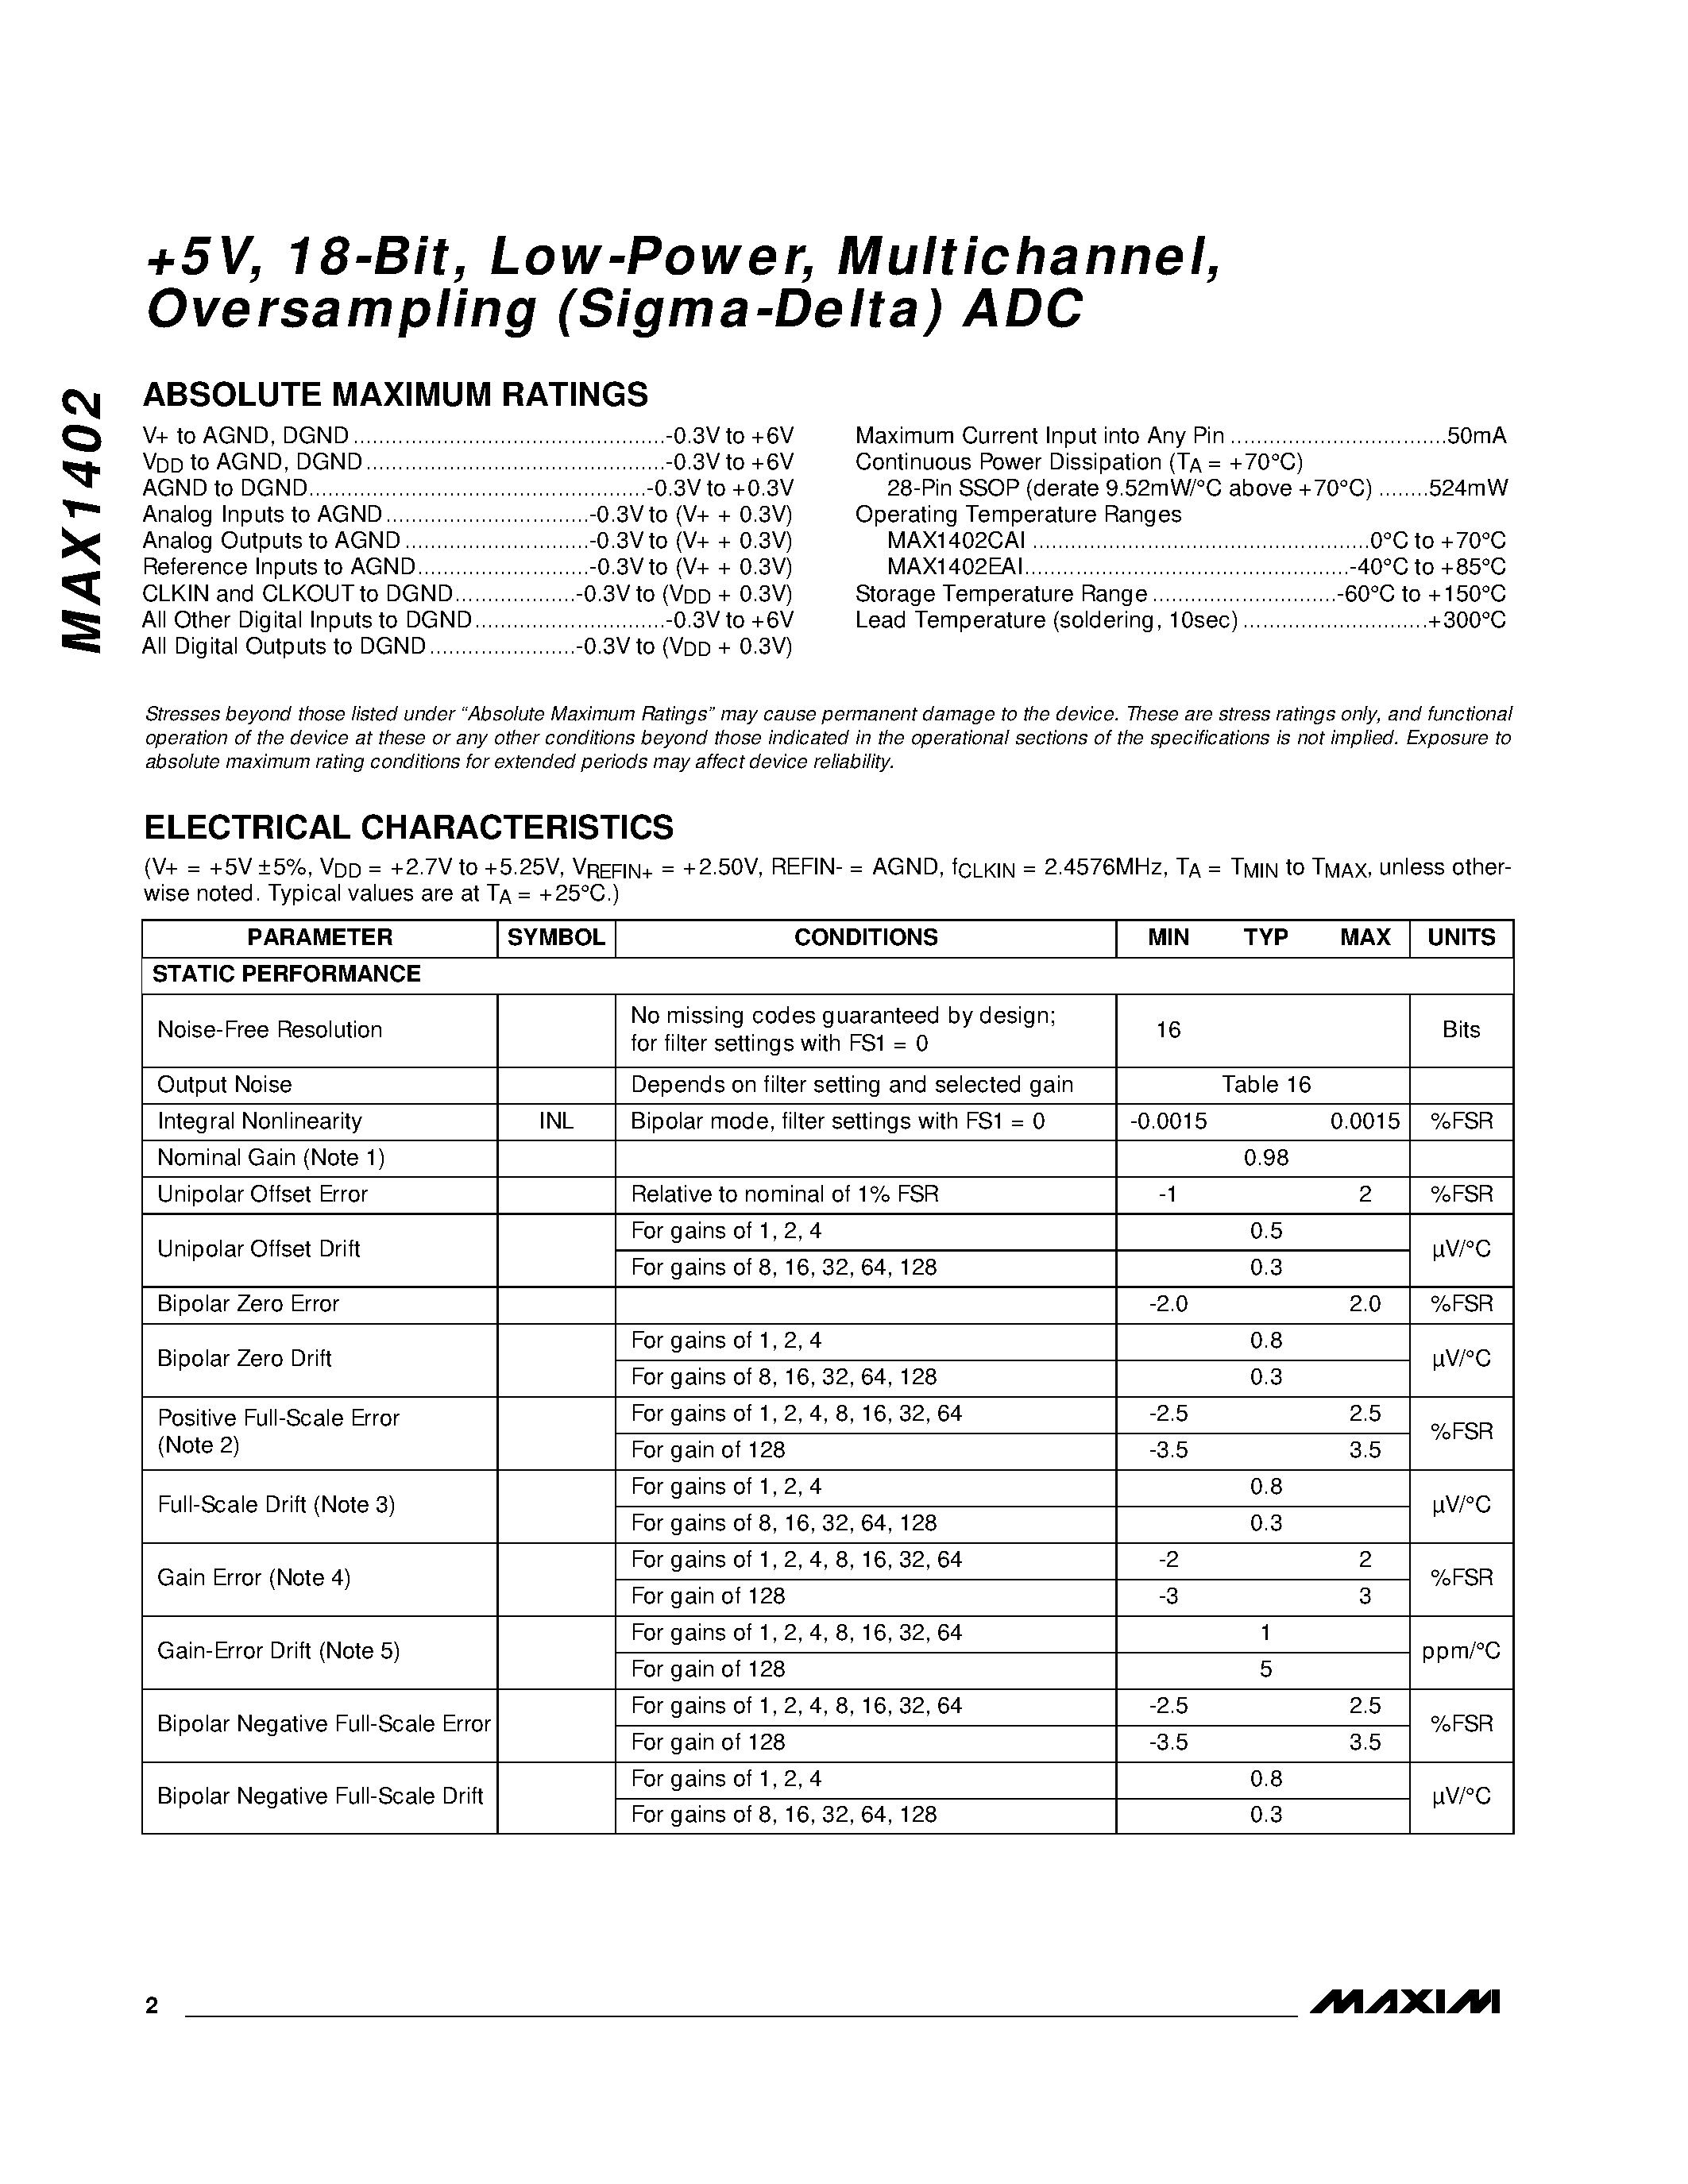 Datasheet MAX1402EAI - +5V / 18-Bit / Low-Power / Multichannel / Oversampling Sigma-Delta ADC page 2